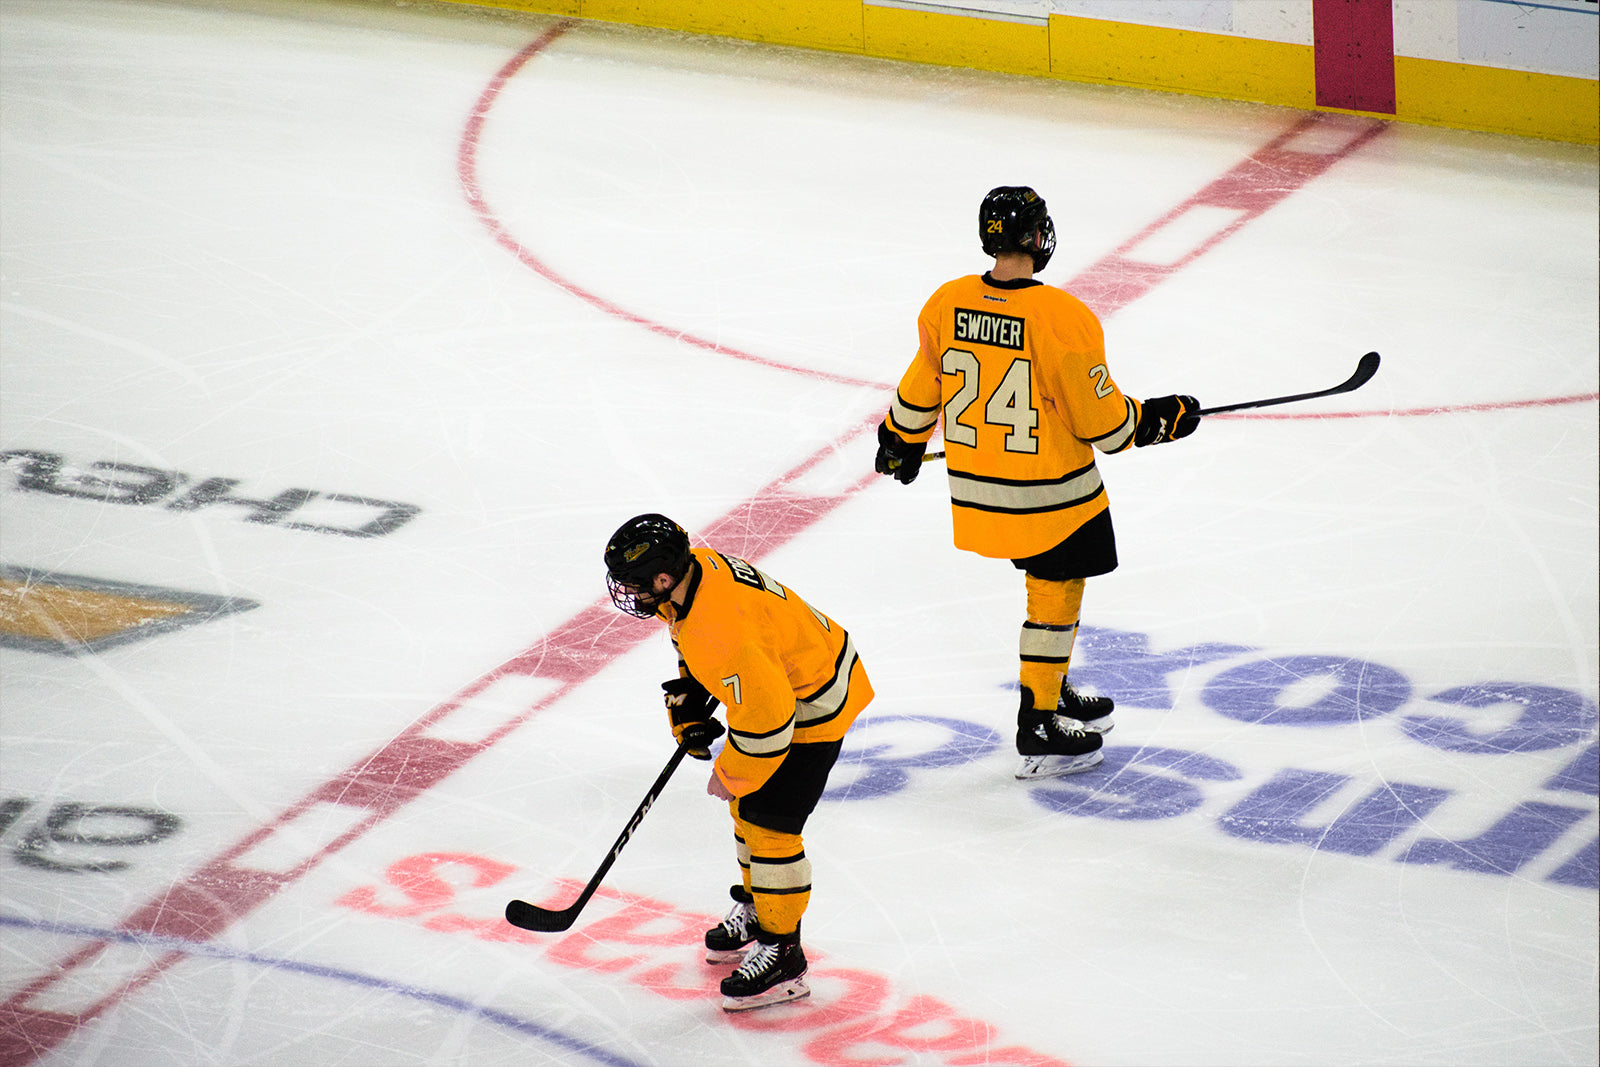 Two kids on the ice in their hockeygear during a hockeygame